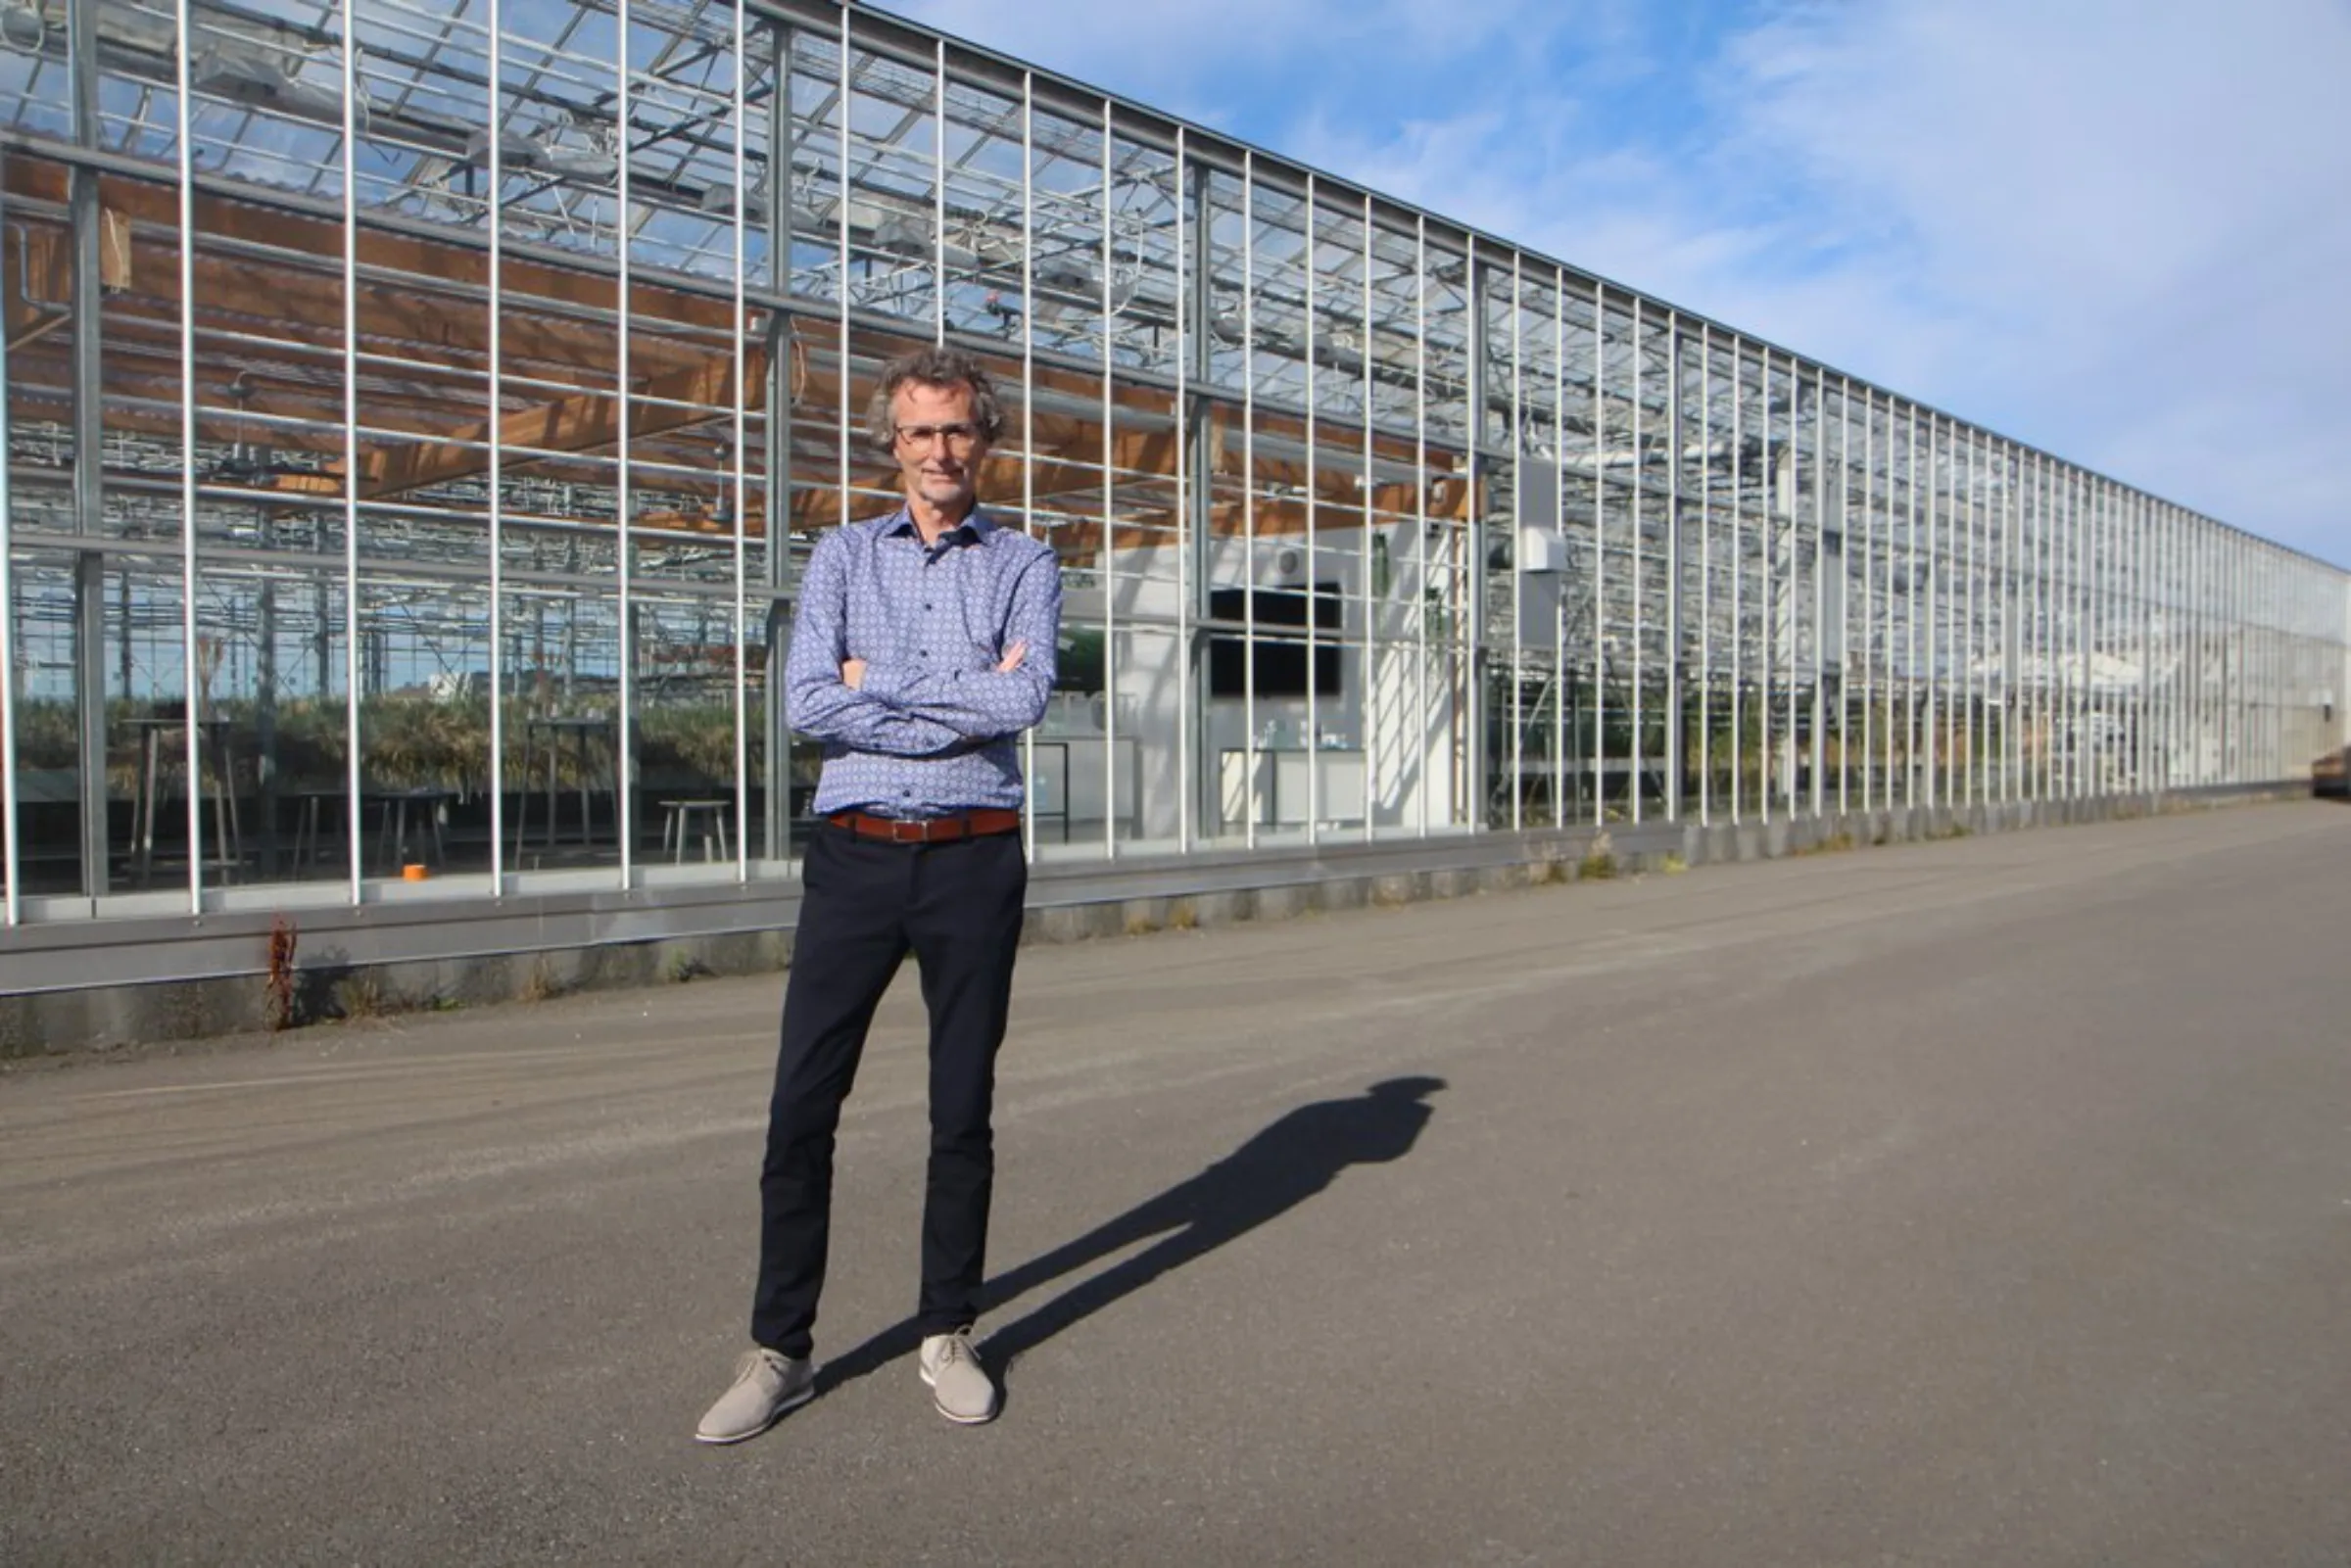 Bjorn Orvar, co-founder and Chief Scientific Officer at ORF Genetics, poses for a photo outside the company’s greenhouse in southwest Iceland on August 24, 2020